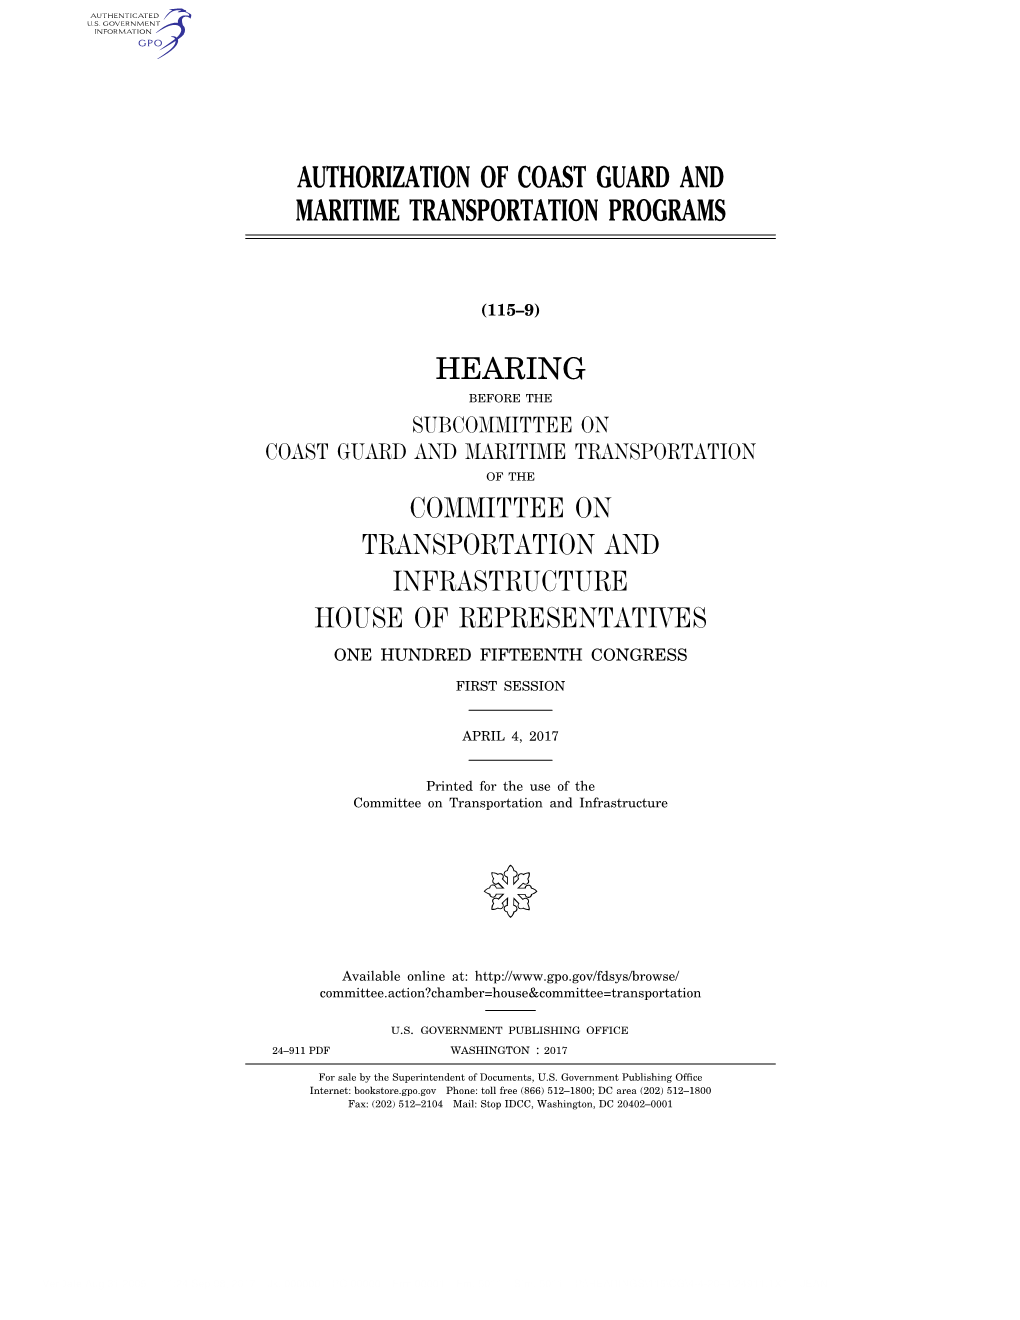 Authorization of Coast Guard and Maritime Transportation Programs Hearing Committee on Transportation and Infrastructure House O